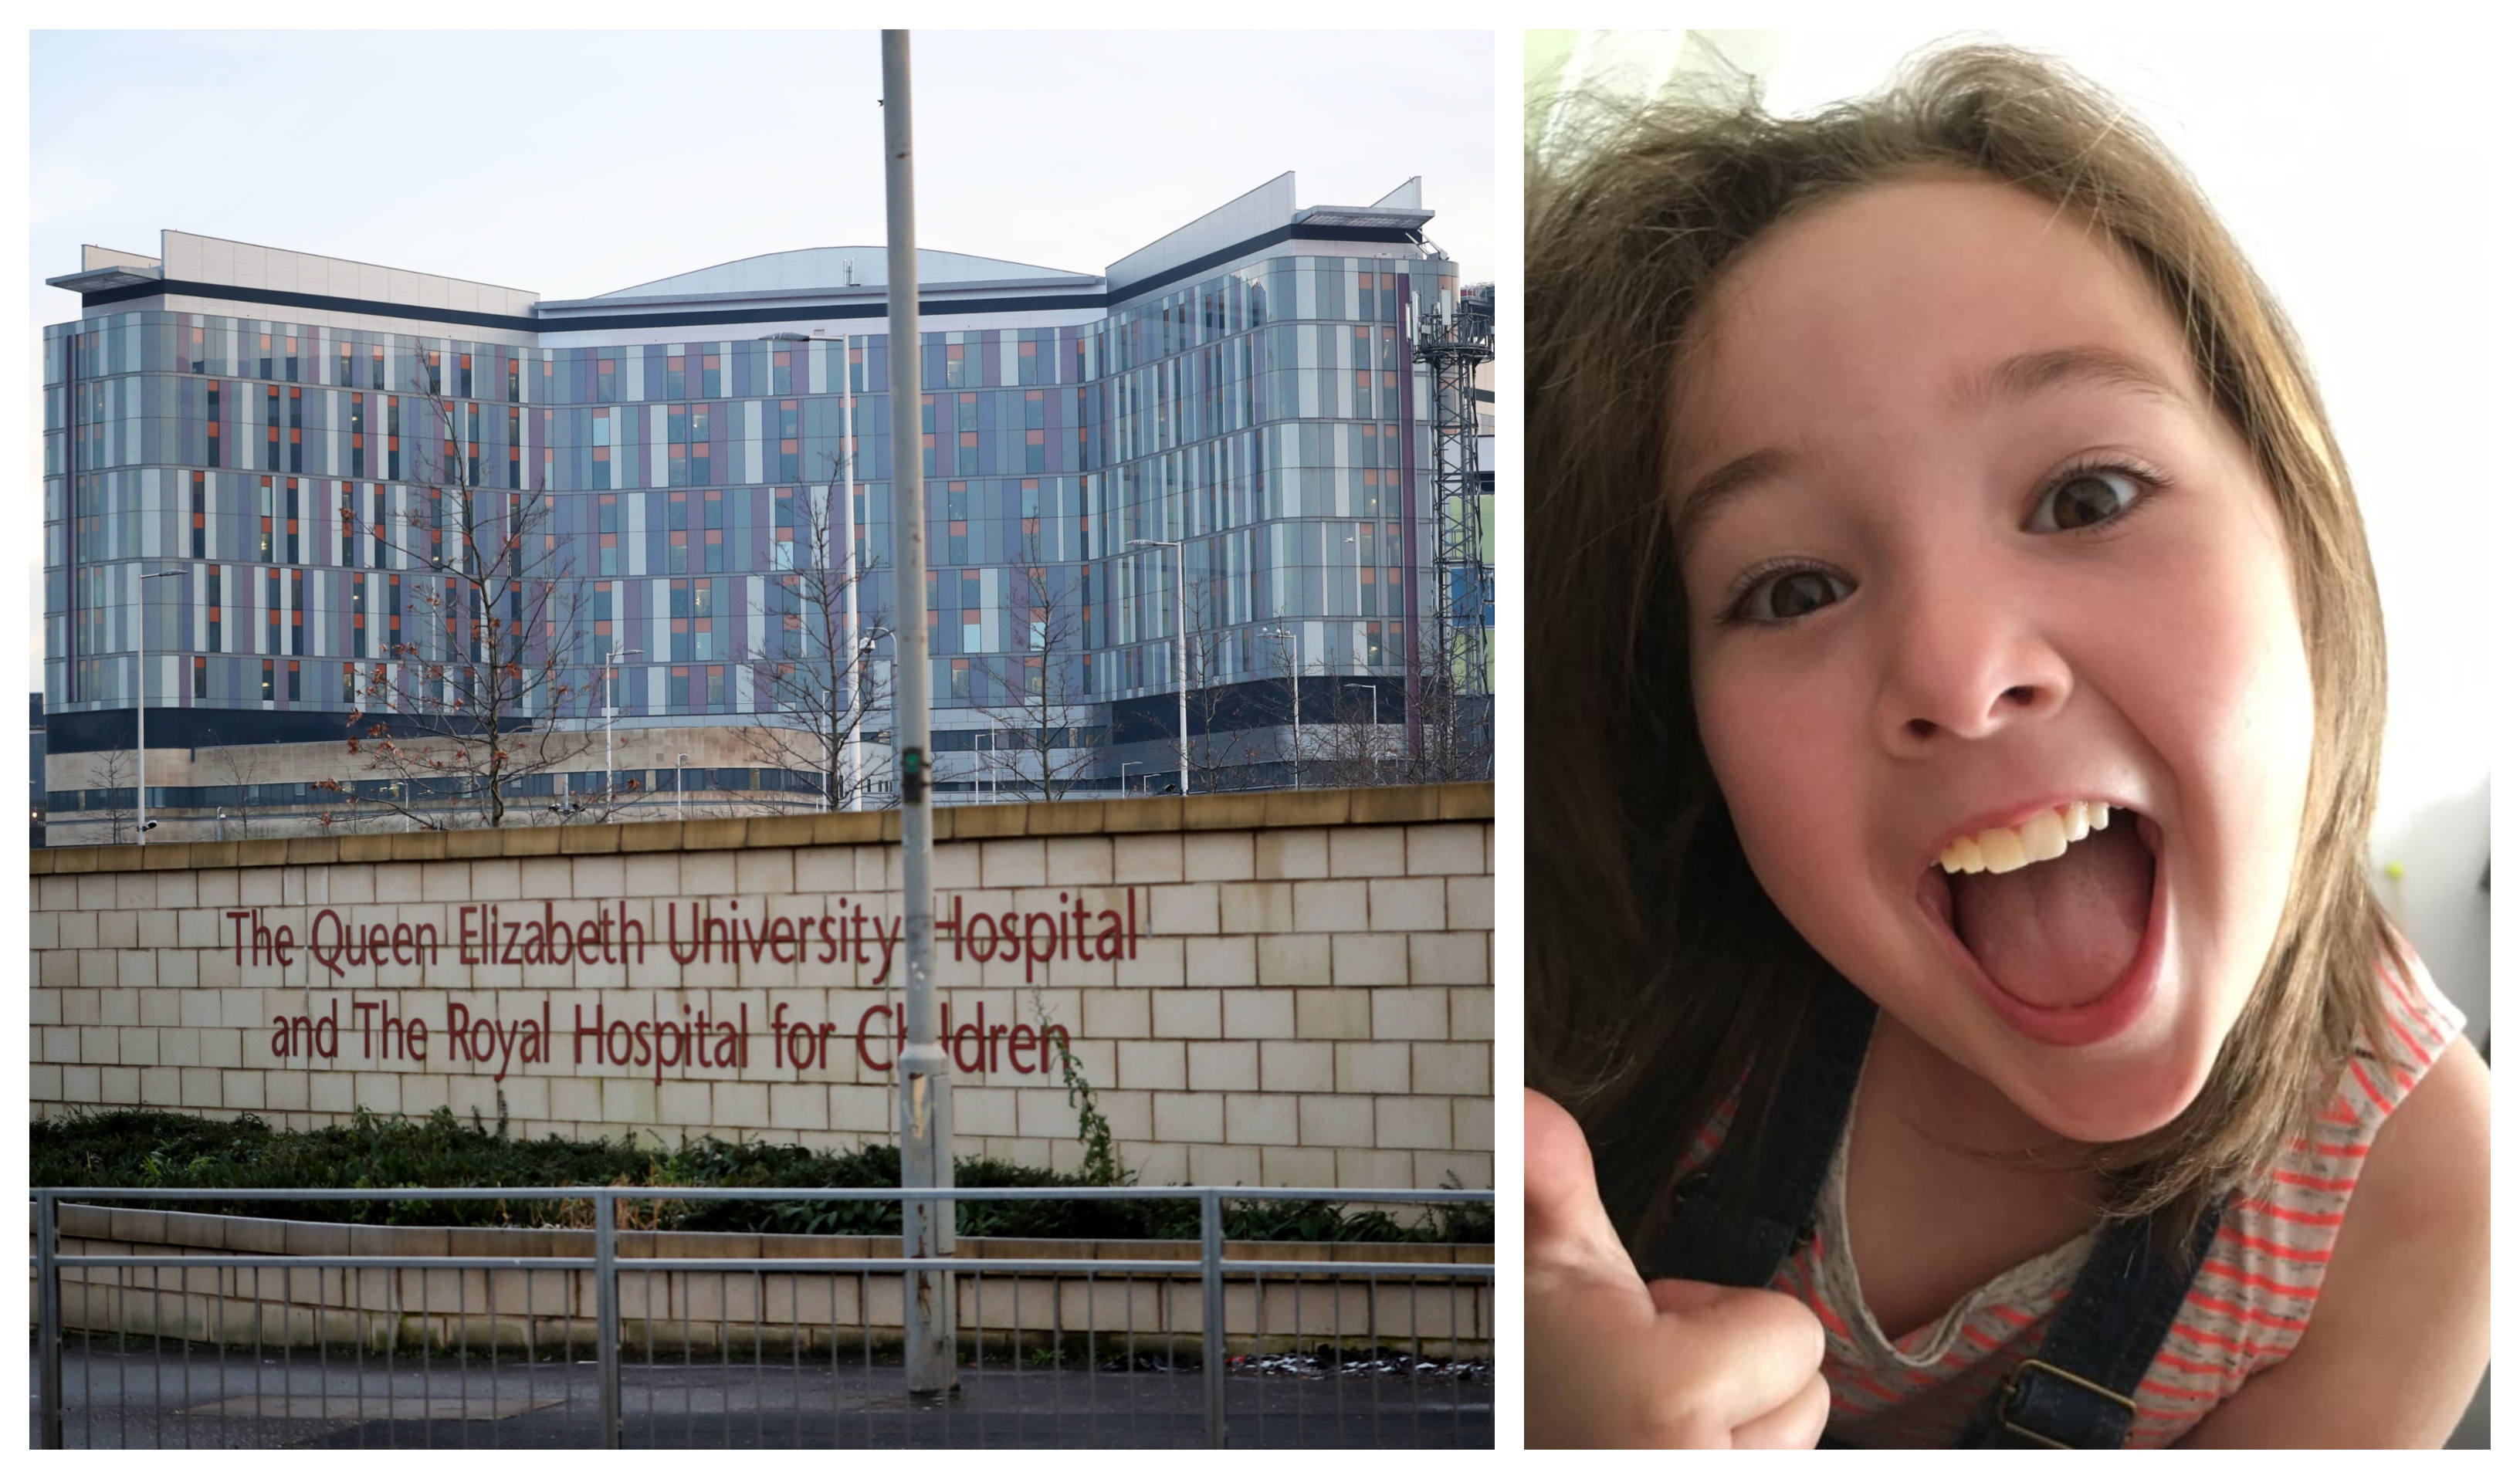 Milly Main, 10, died at the Queen Elizabeth University Hospital from an infection linked to dirty water